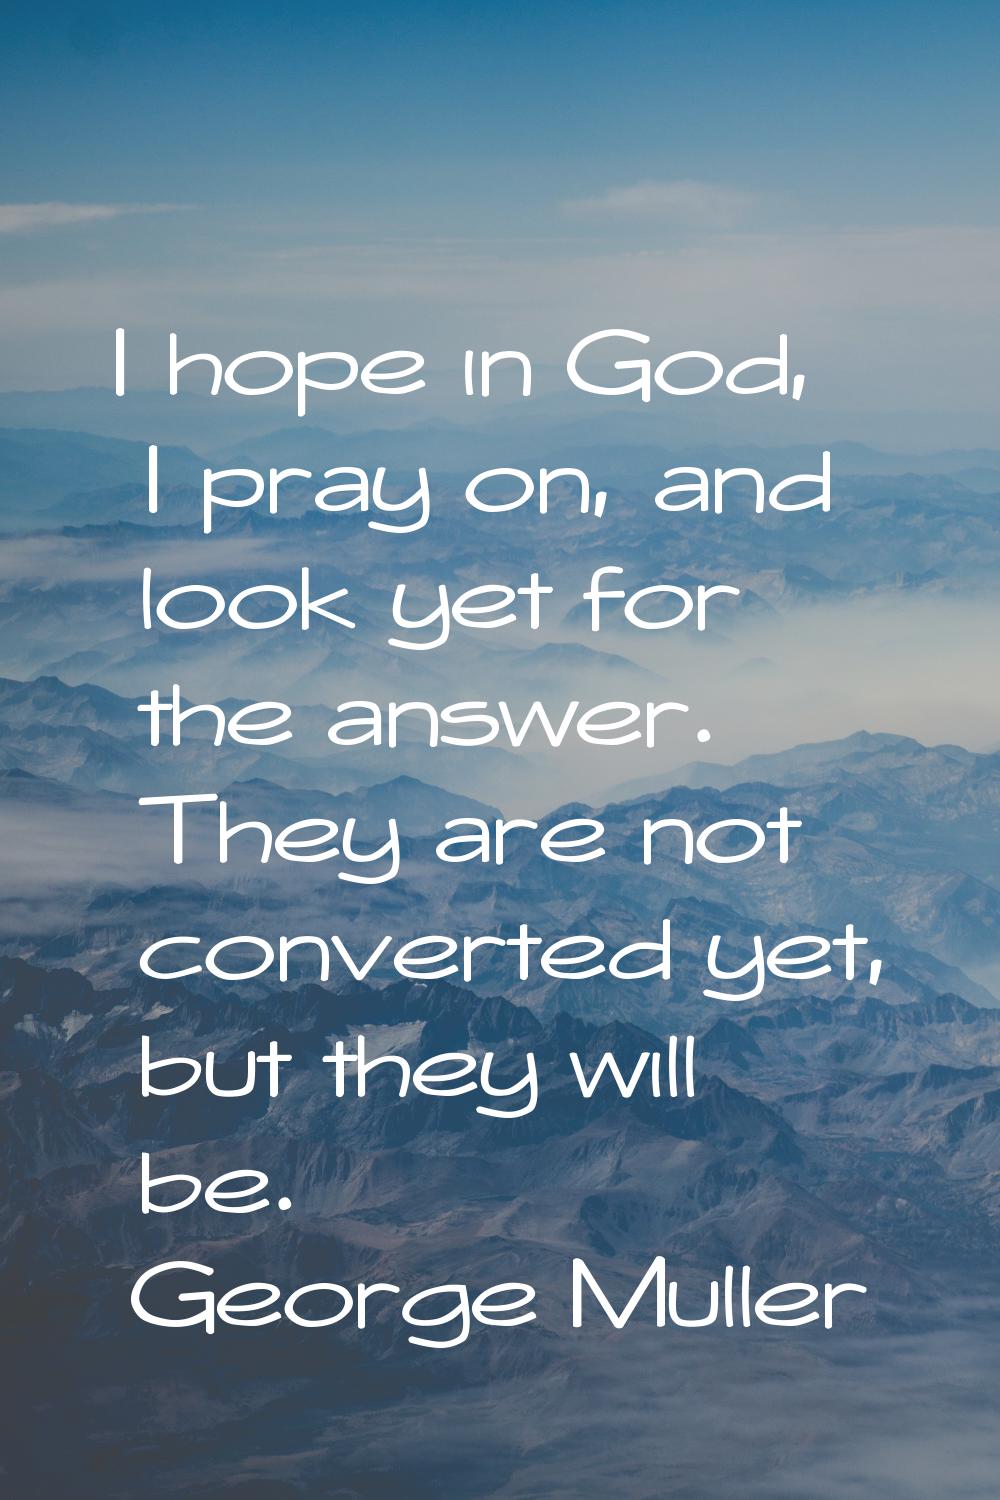 I hope in God, I pray on, and look yet for the answer. They are not converted yet, but they will be